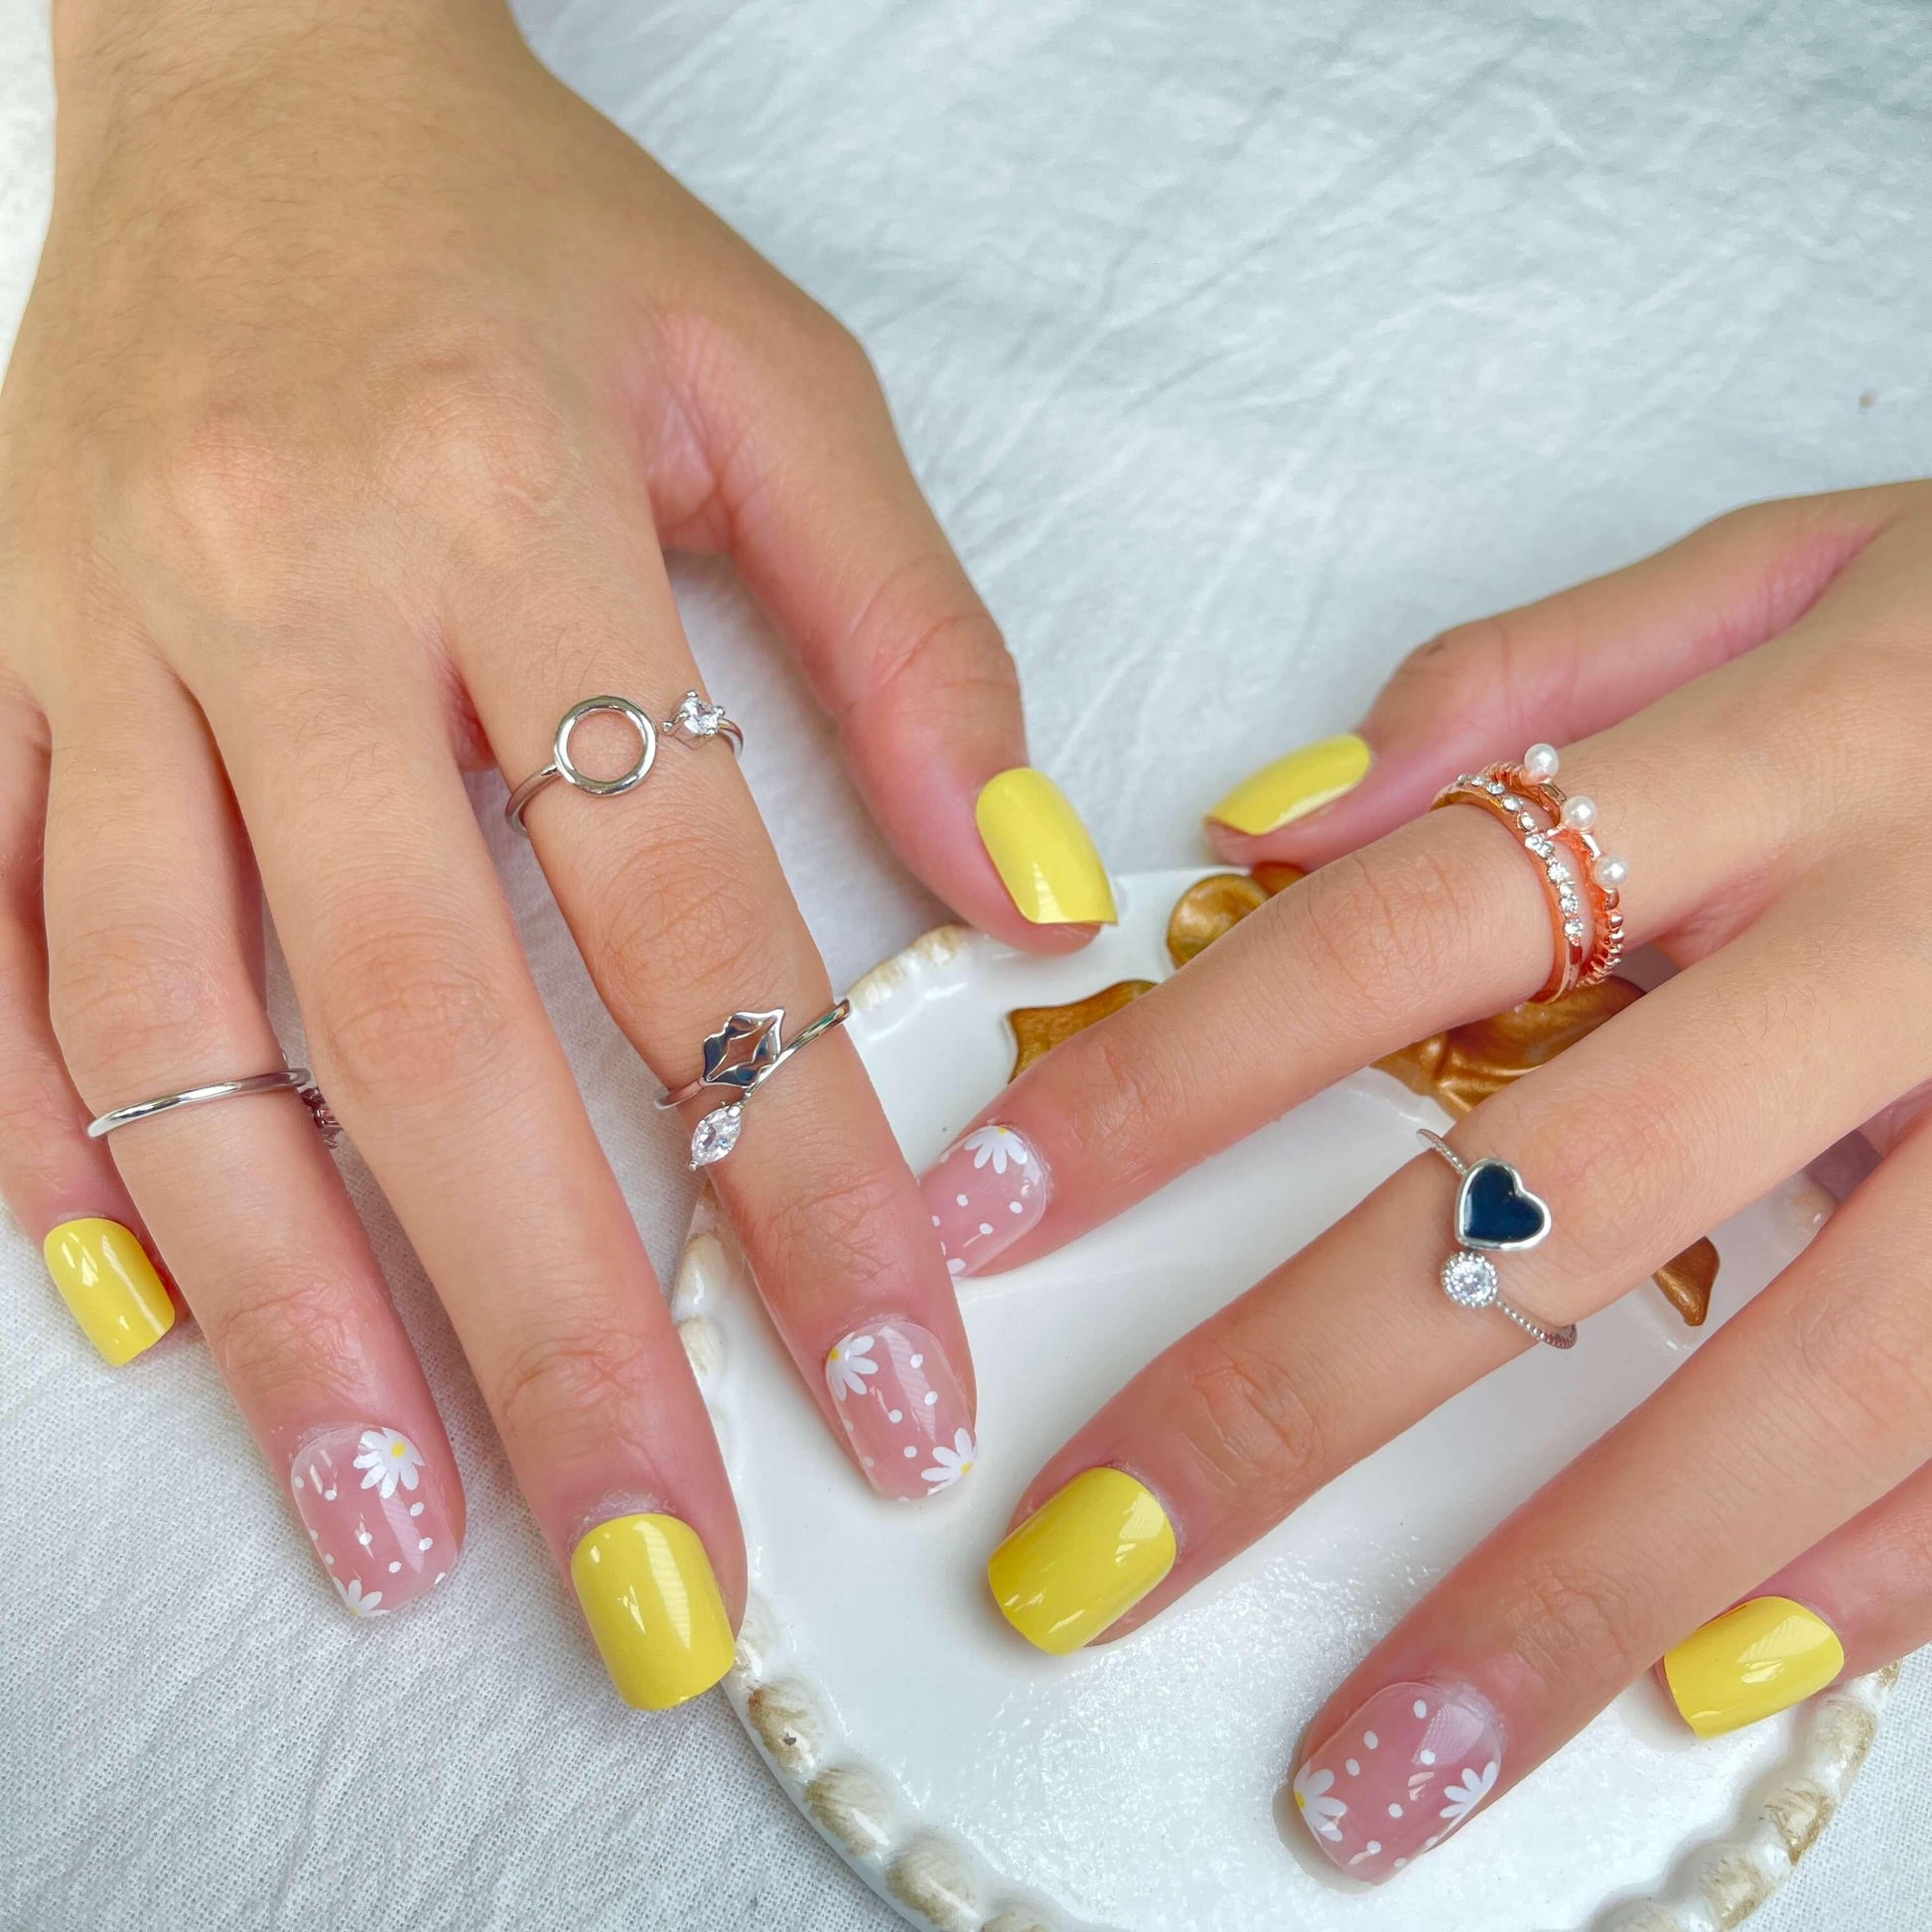 [AUTUMN SALE] Yellow and White Daisy Flowers Short Press On Nails - Belle Rose Nails